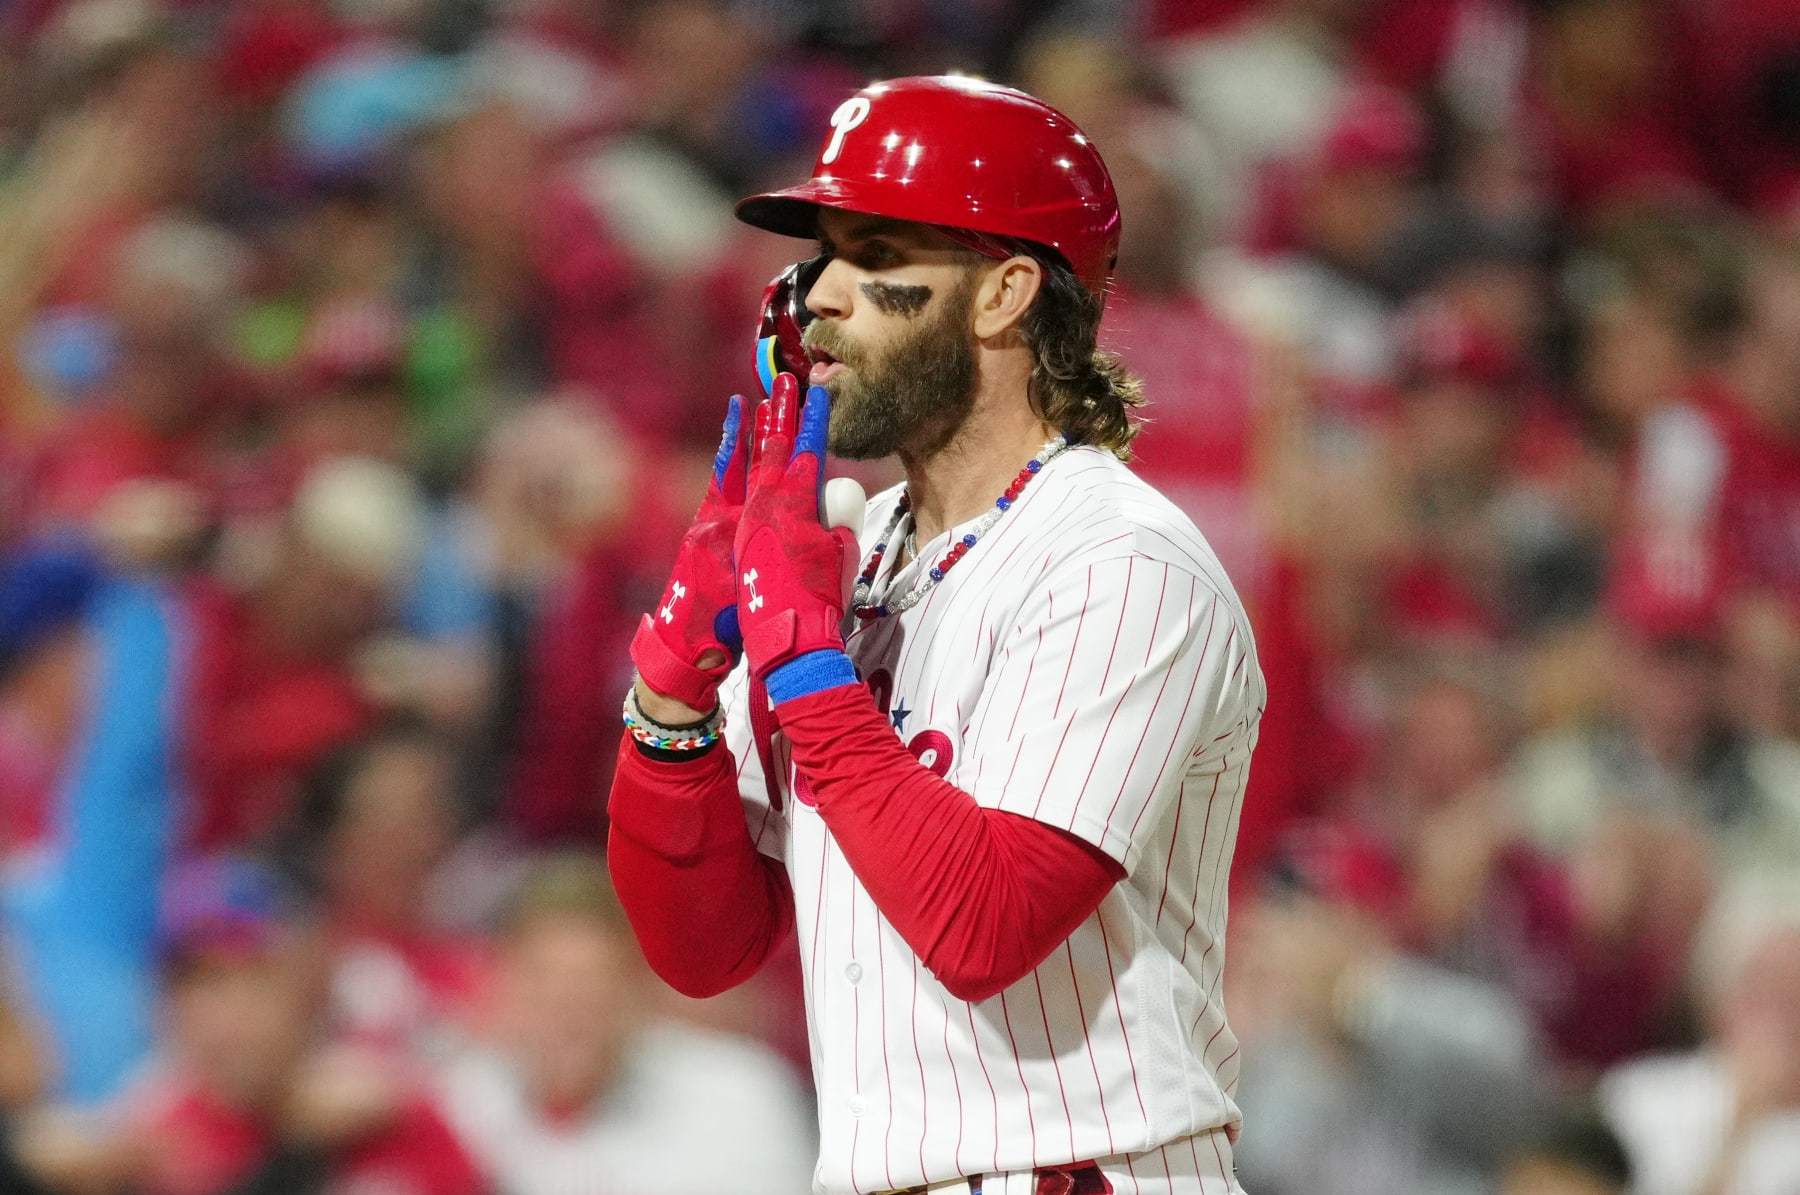 Phillies star Bryce Harper ejected, launches helmet into stands after  charging at umpire Ángel Hernández